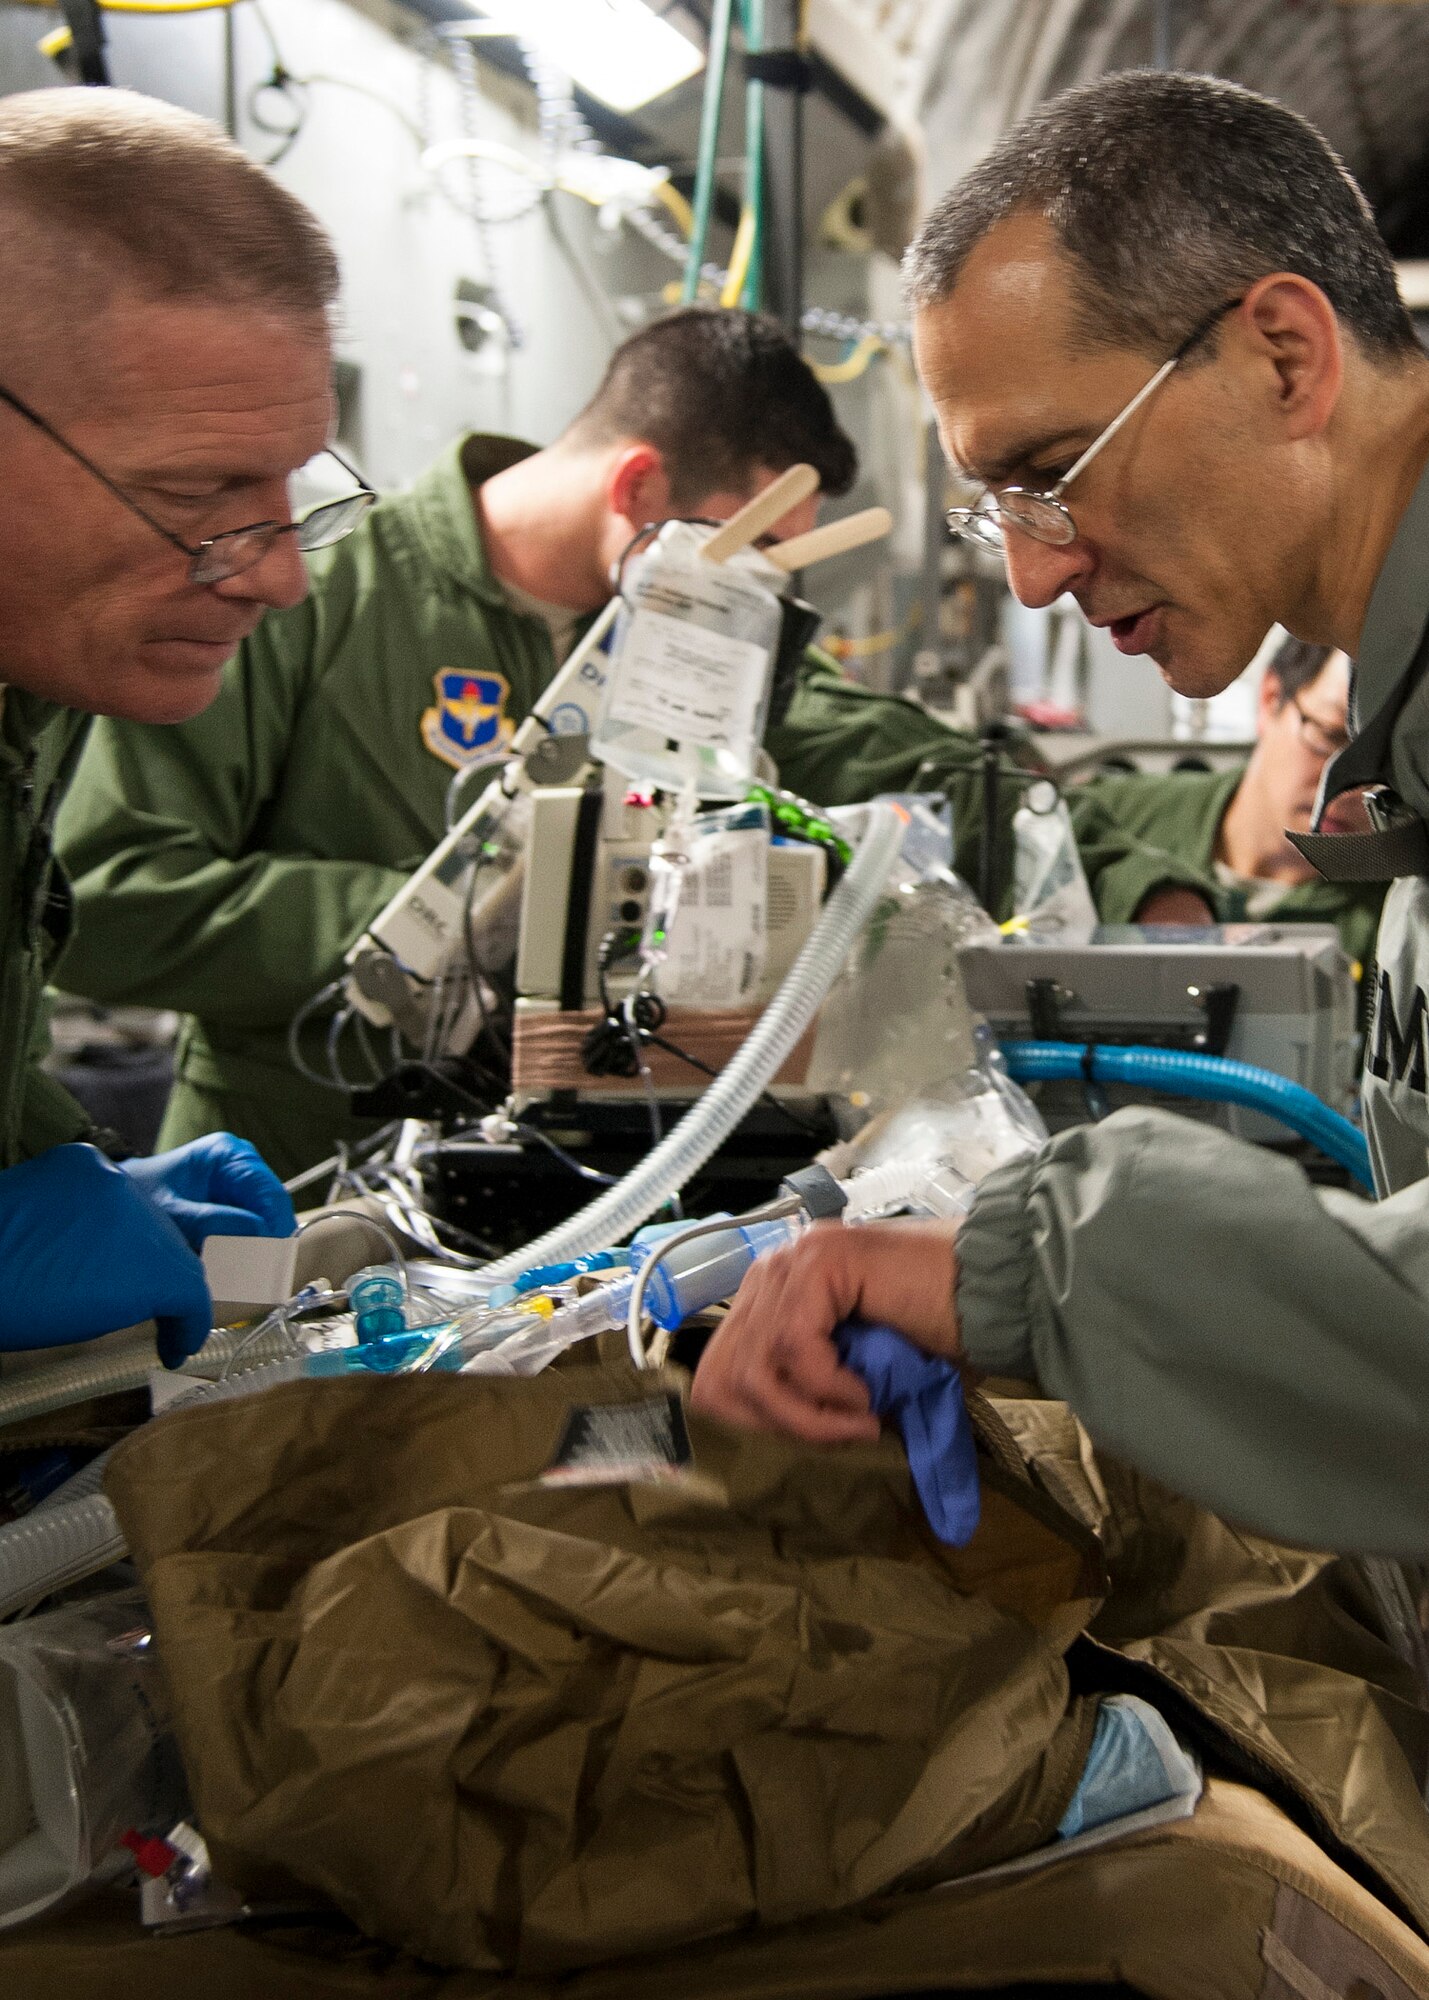 U.S. Air Force Lt. Col. Jeremy Cannon (right) and Army Capt. Michael Campbell both treat an extracorporeal membrane oxygenation patient on a C-17 Globemaster III, Jan. 16, Joint Base San Antonio-Lackland, Texas. (U.S. Air Force photo/Staff Sgt. Kevin Iinuma)